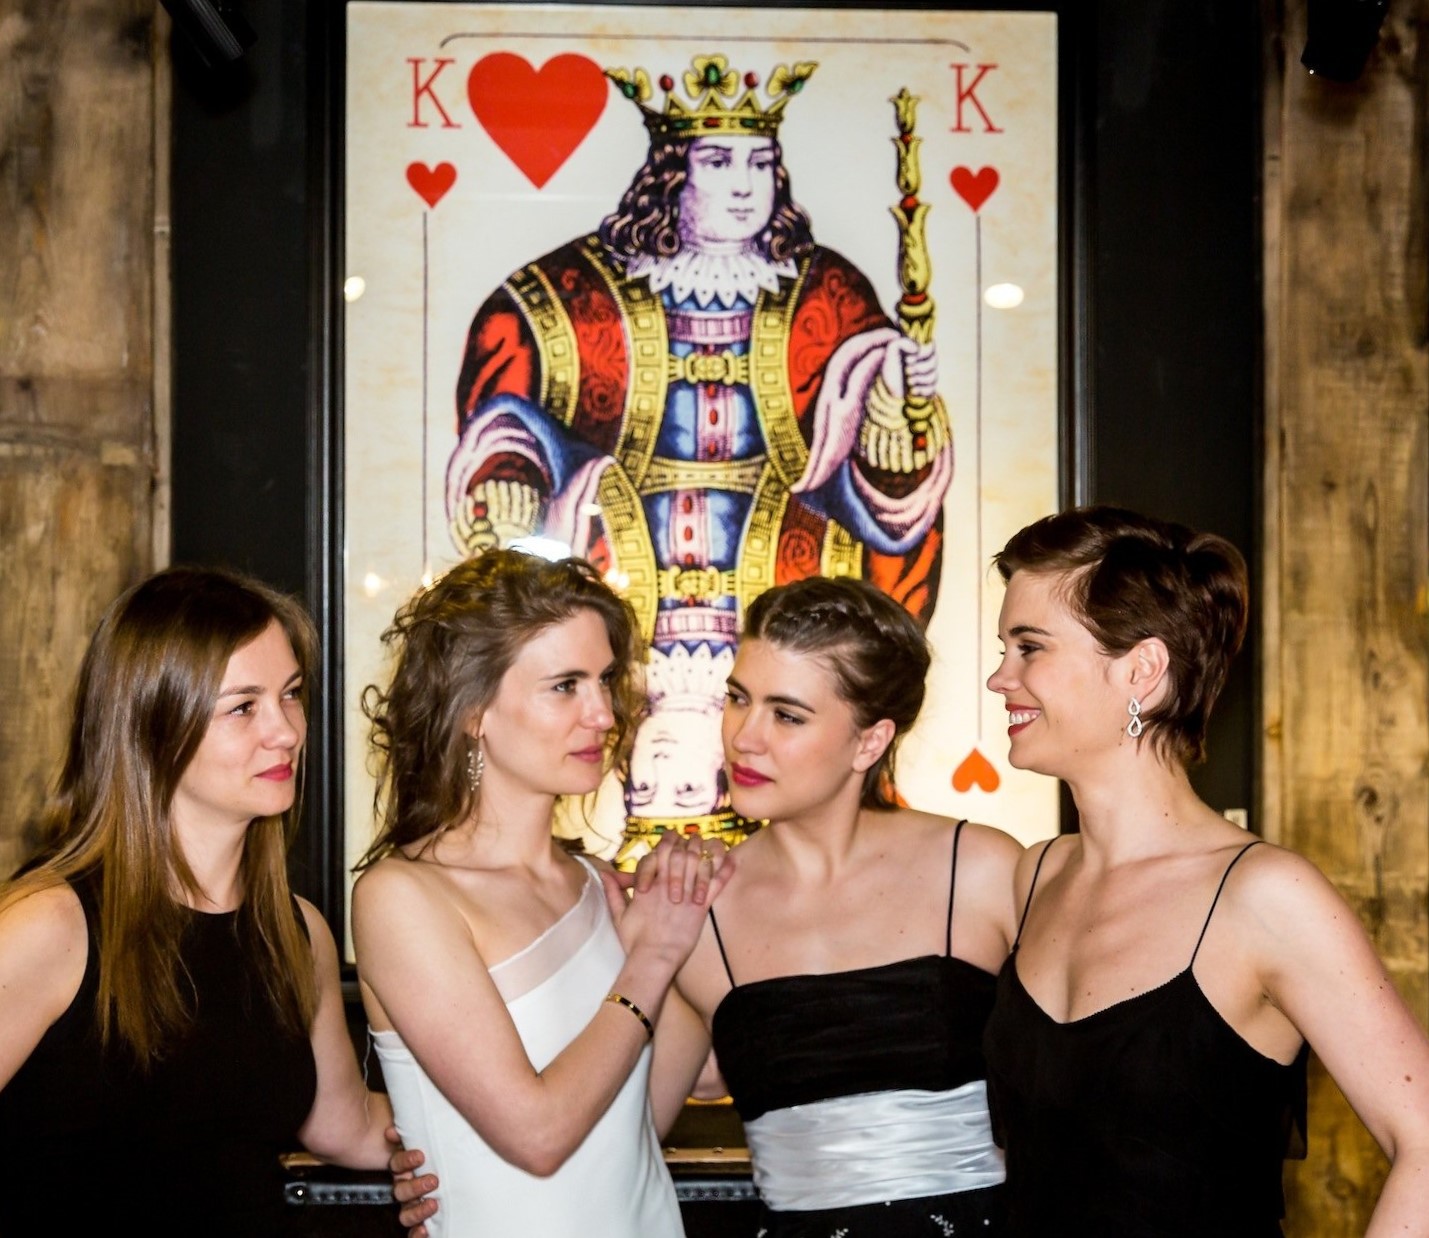 The Polla Sisters and the King of Hearts